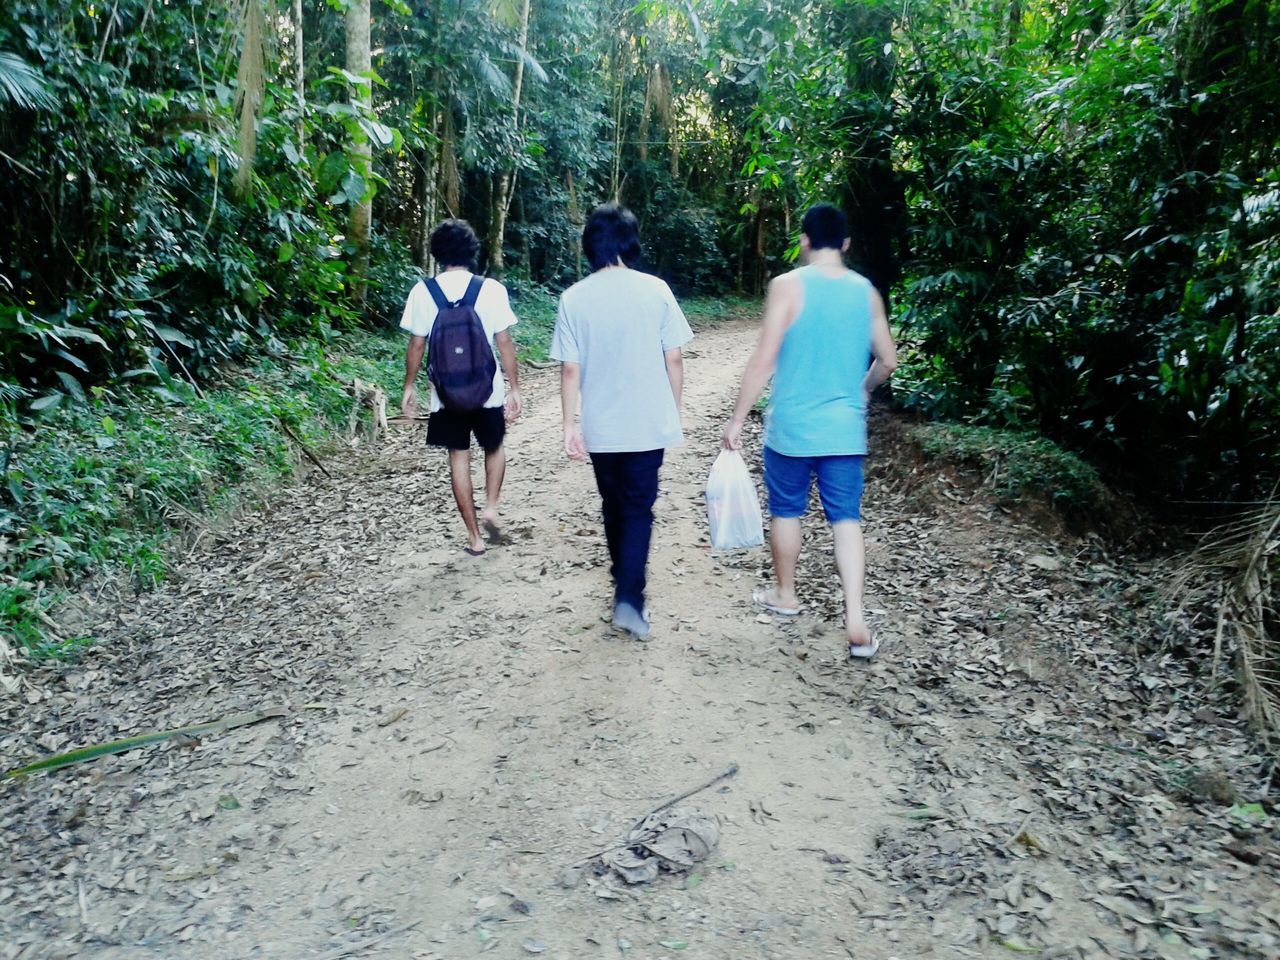 rear view, walking, togetherness, lifestyles, full length, leisure activity, person, men, tree, bonding, casual clothing, the way forward, love, holding hands, footpath, friendship, standing